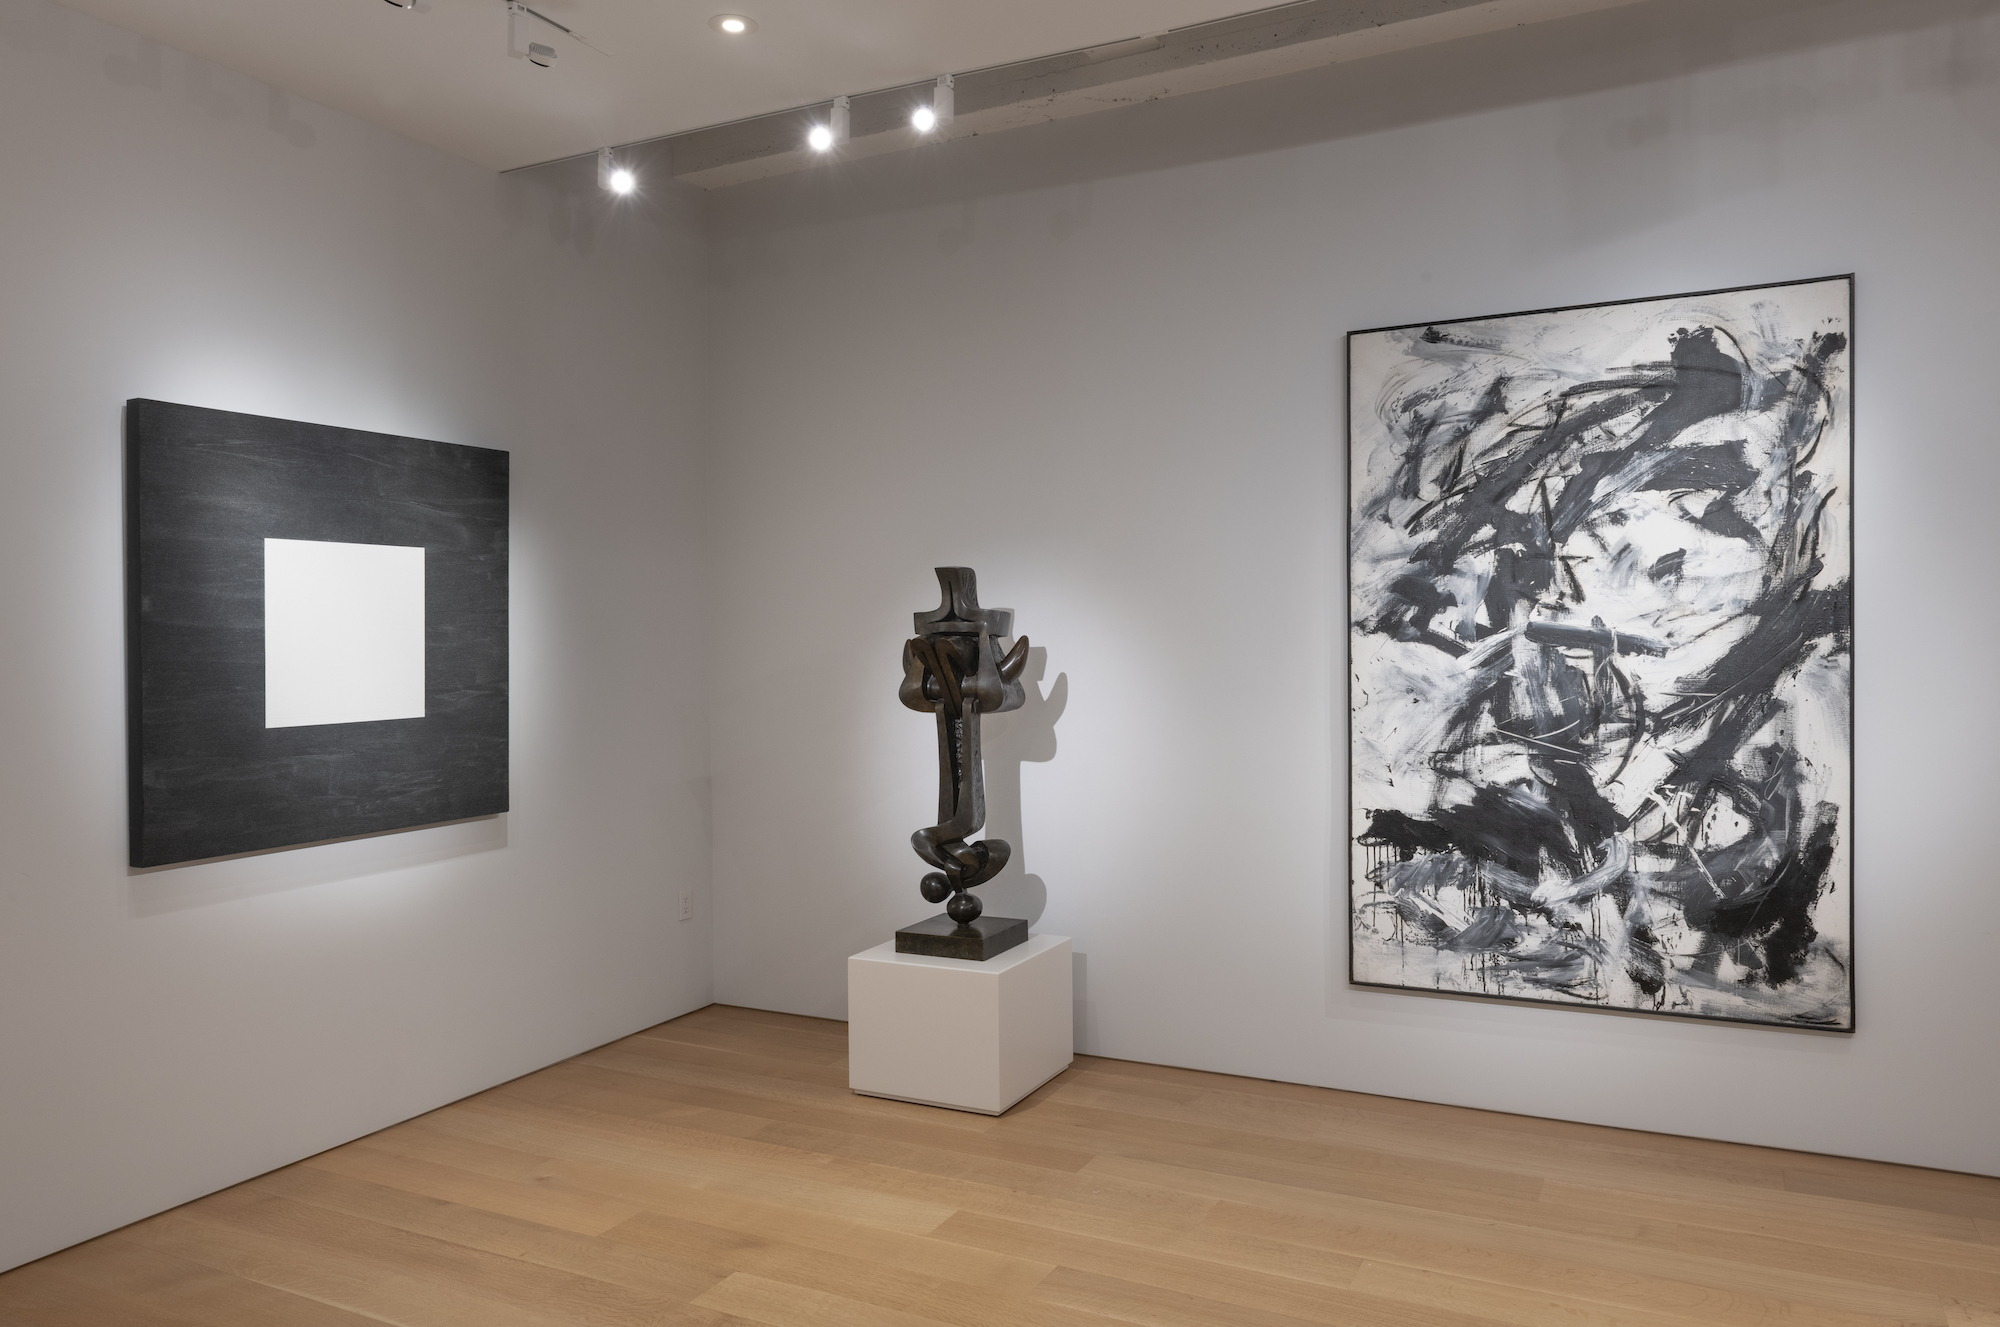 Gallery view of three pieces. One painting that is a black square with a white square in the center. Next to that is a sculpture, which is next to a black and white abstract expressionist image.